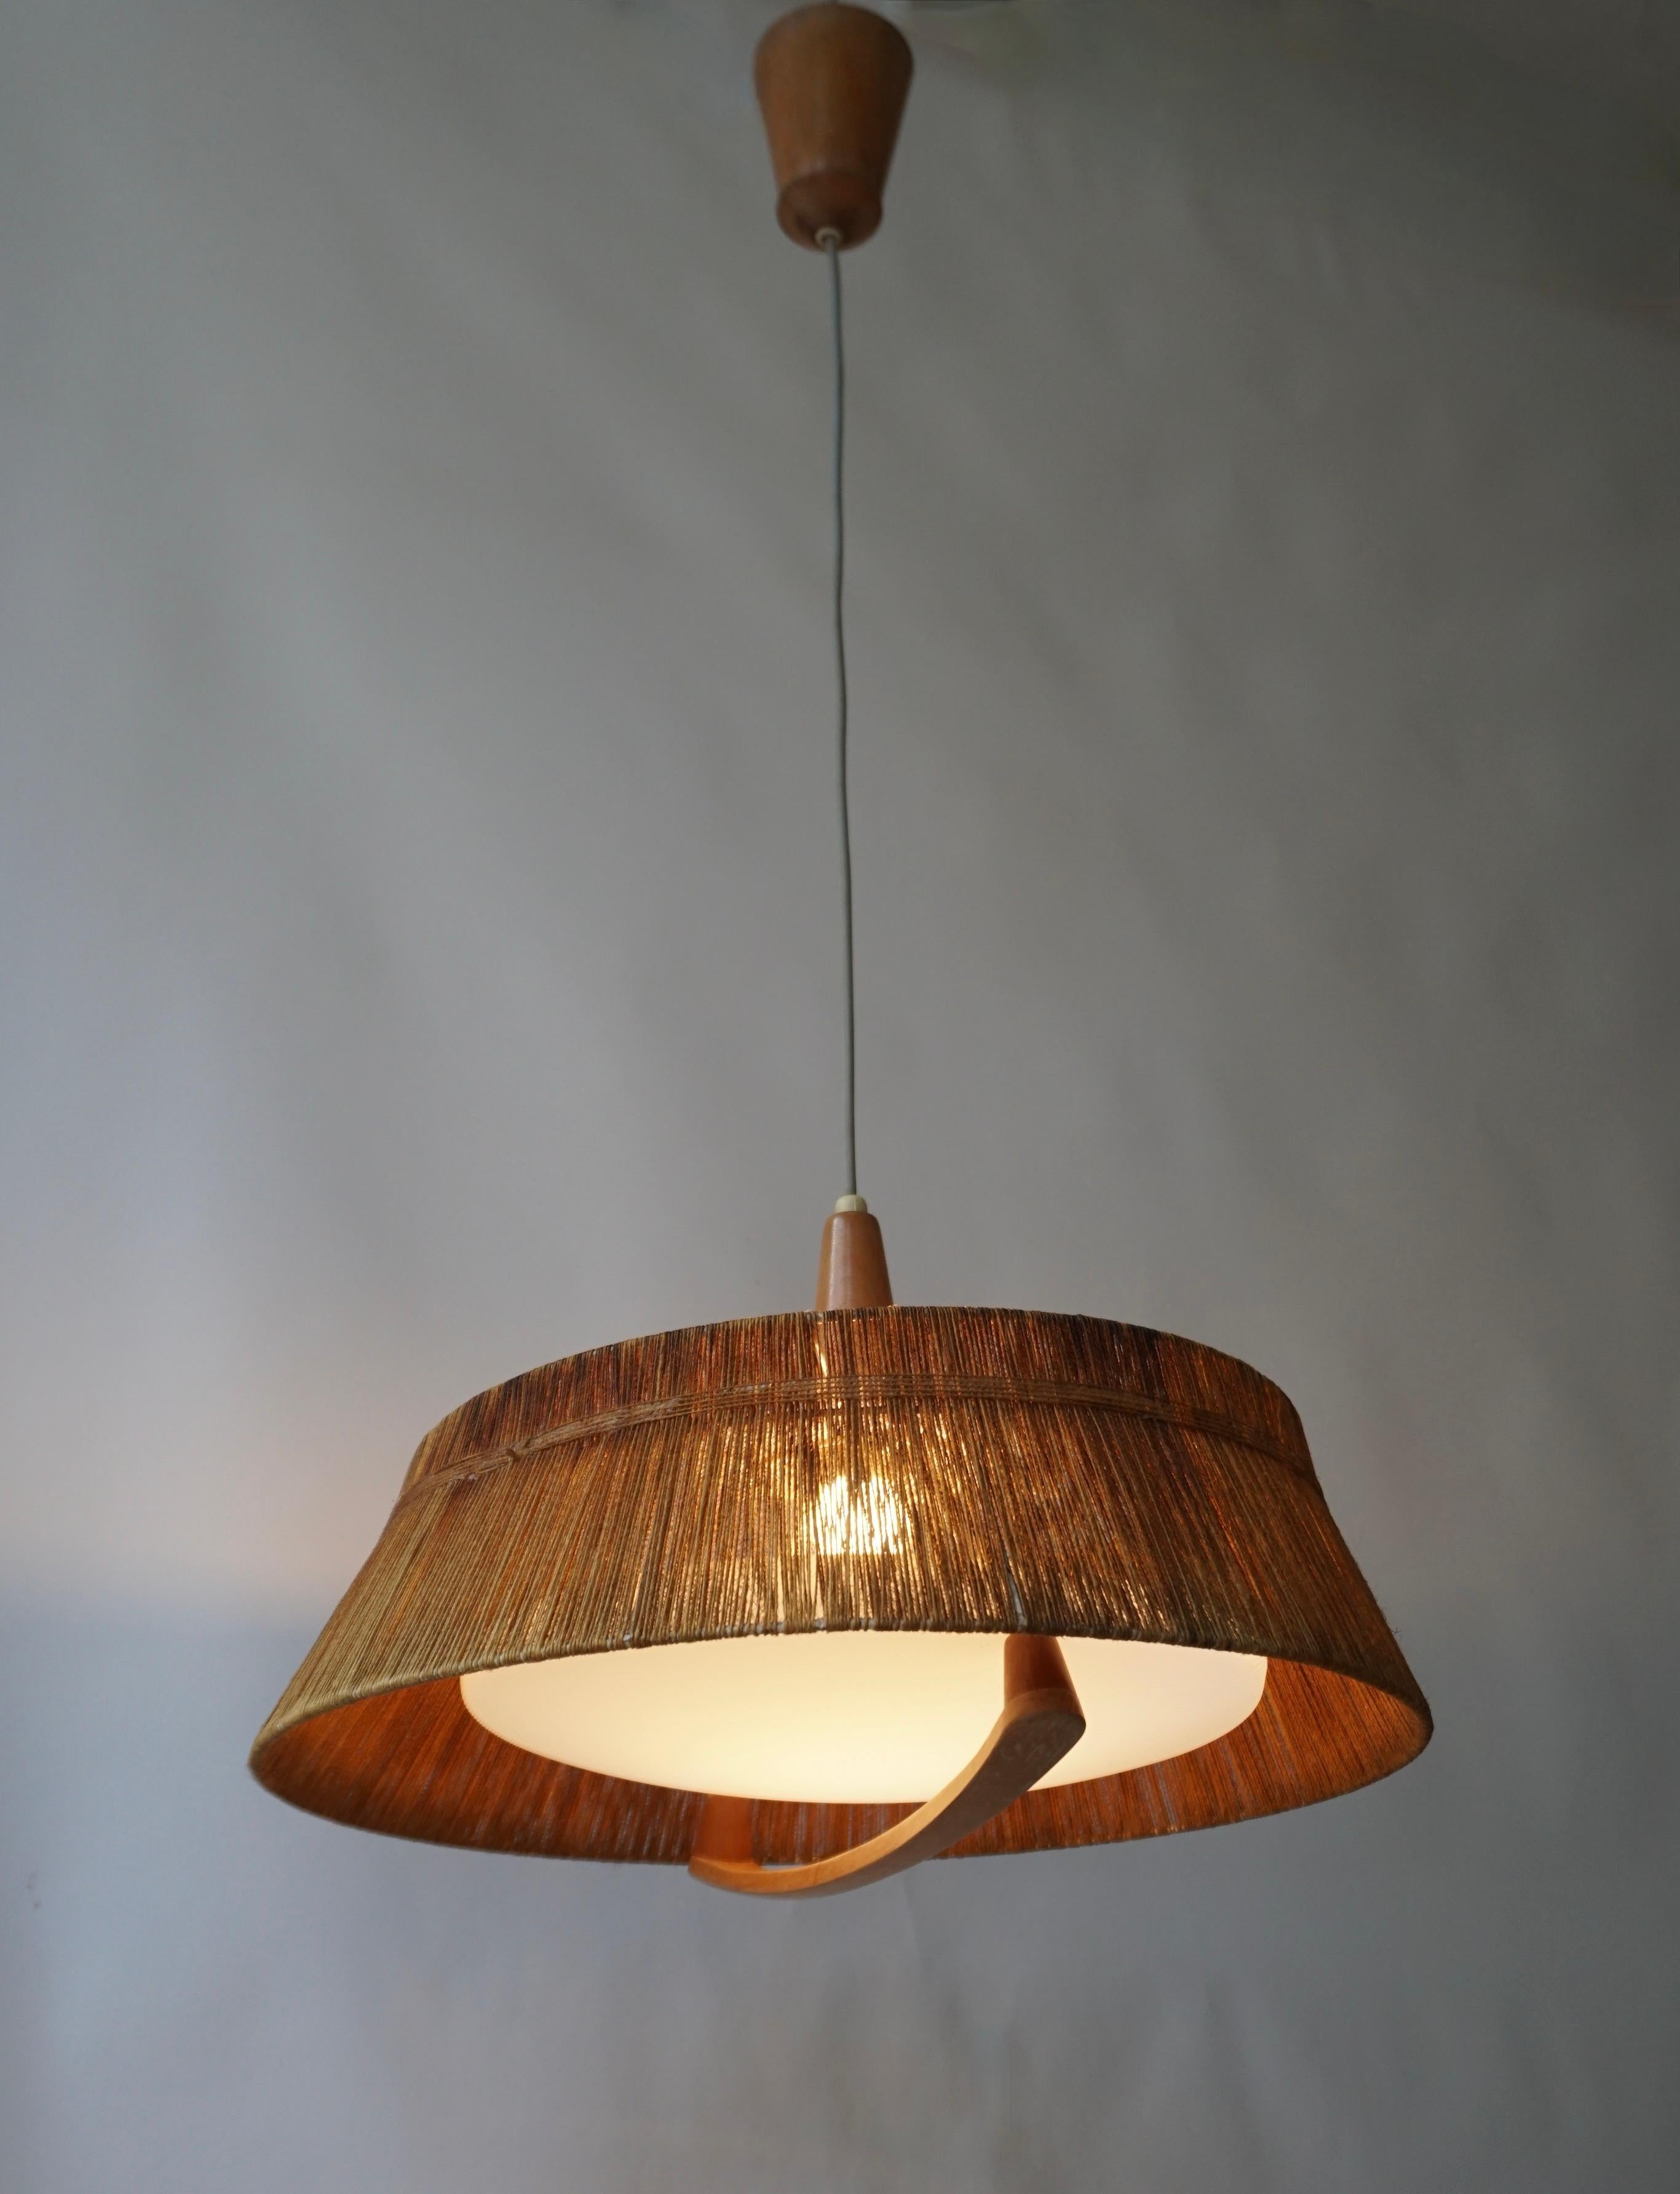 Large Scandinavian style pendant light from the 60s.
Metal frame with jute rope, plastic light cover and wooden parts.

The lamp has one sockets for incandescent lamp with screw base or E27 type LEDs. It is possible to install this fixture in all